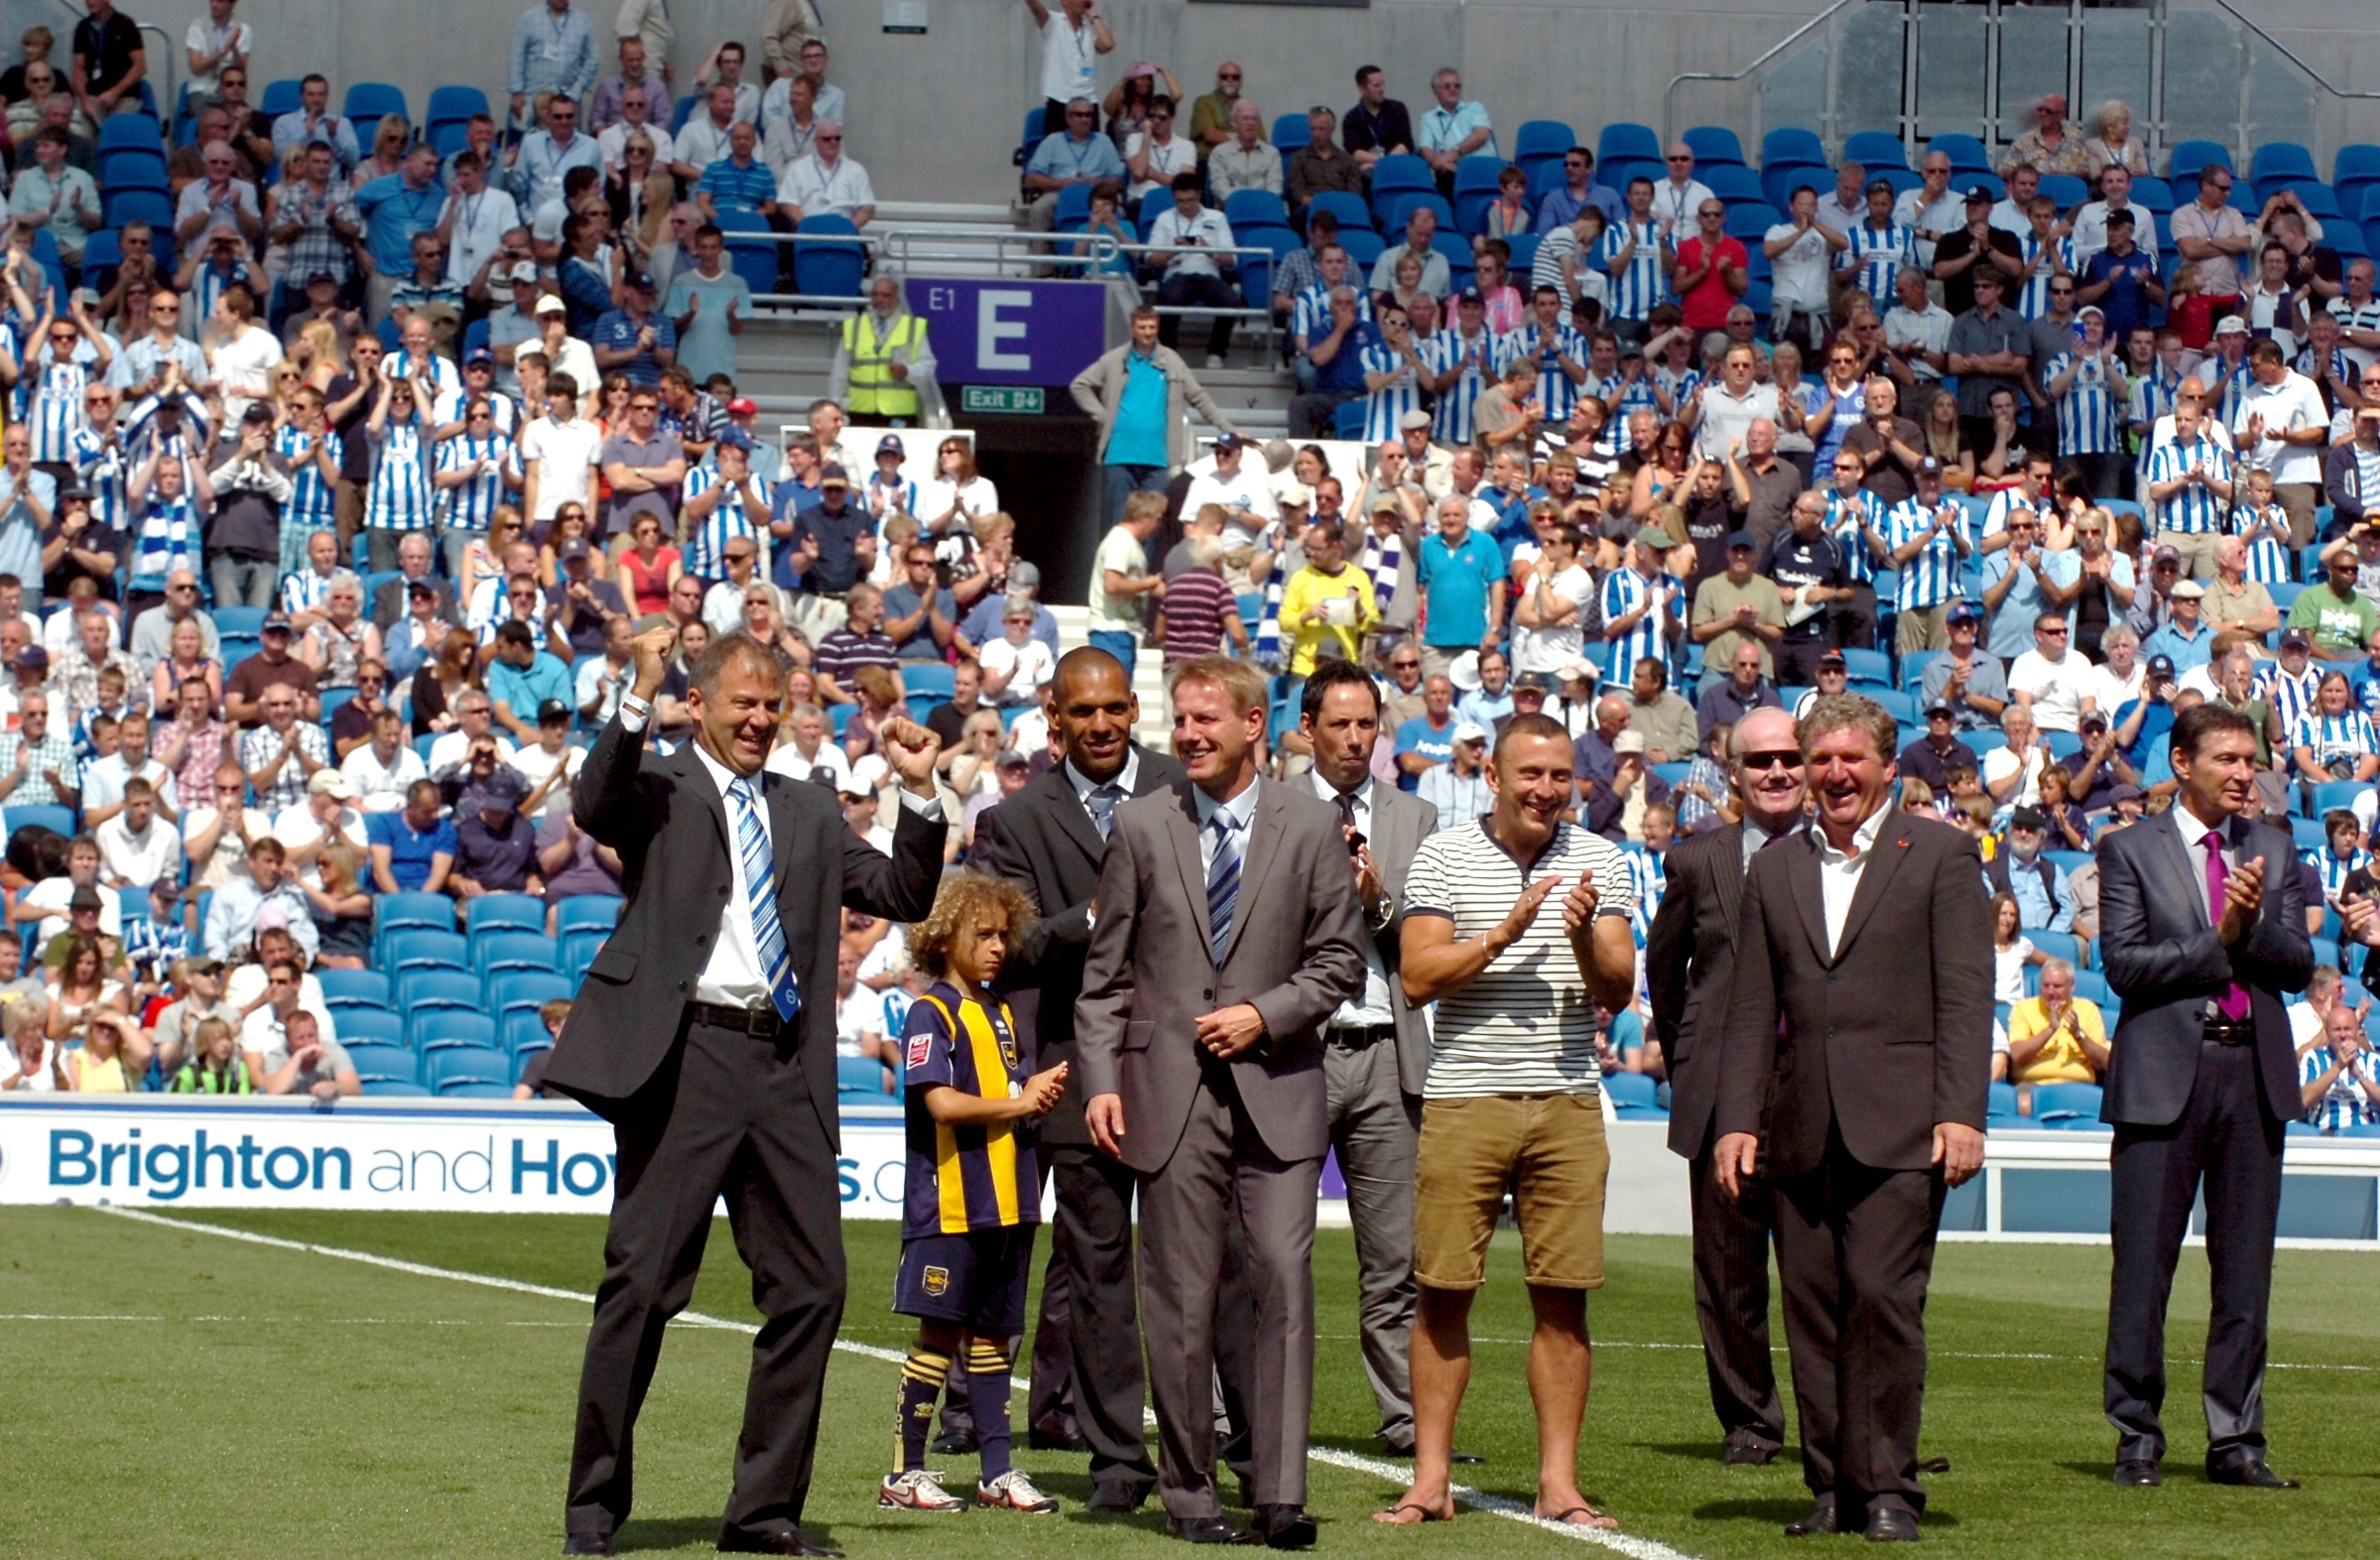 Albion legends are presented to the crowd